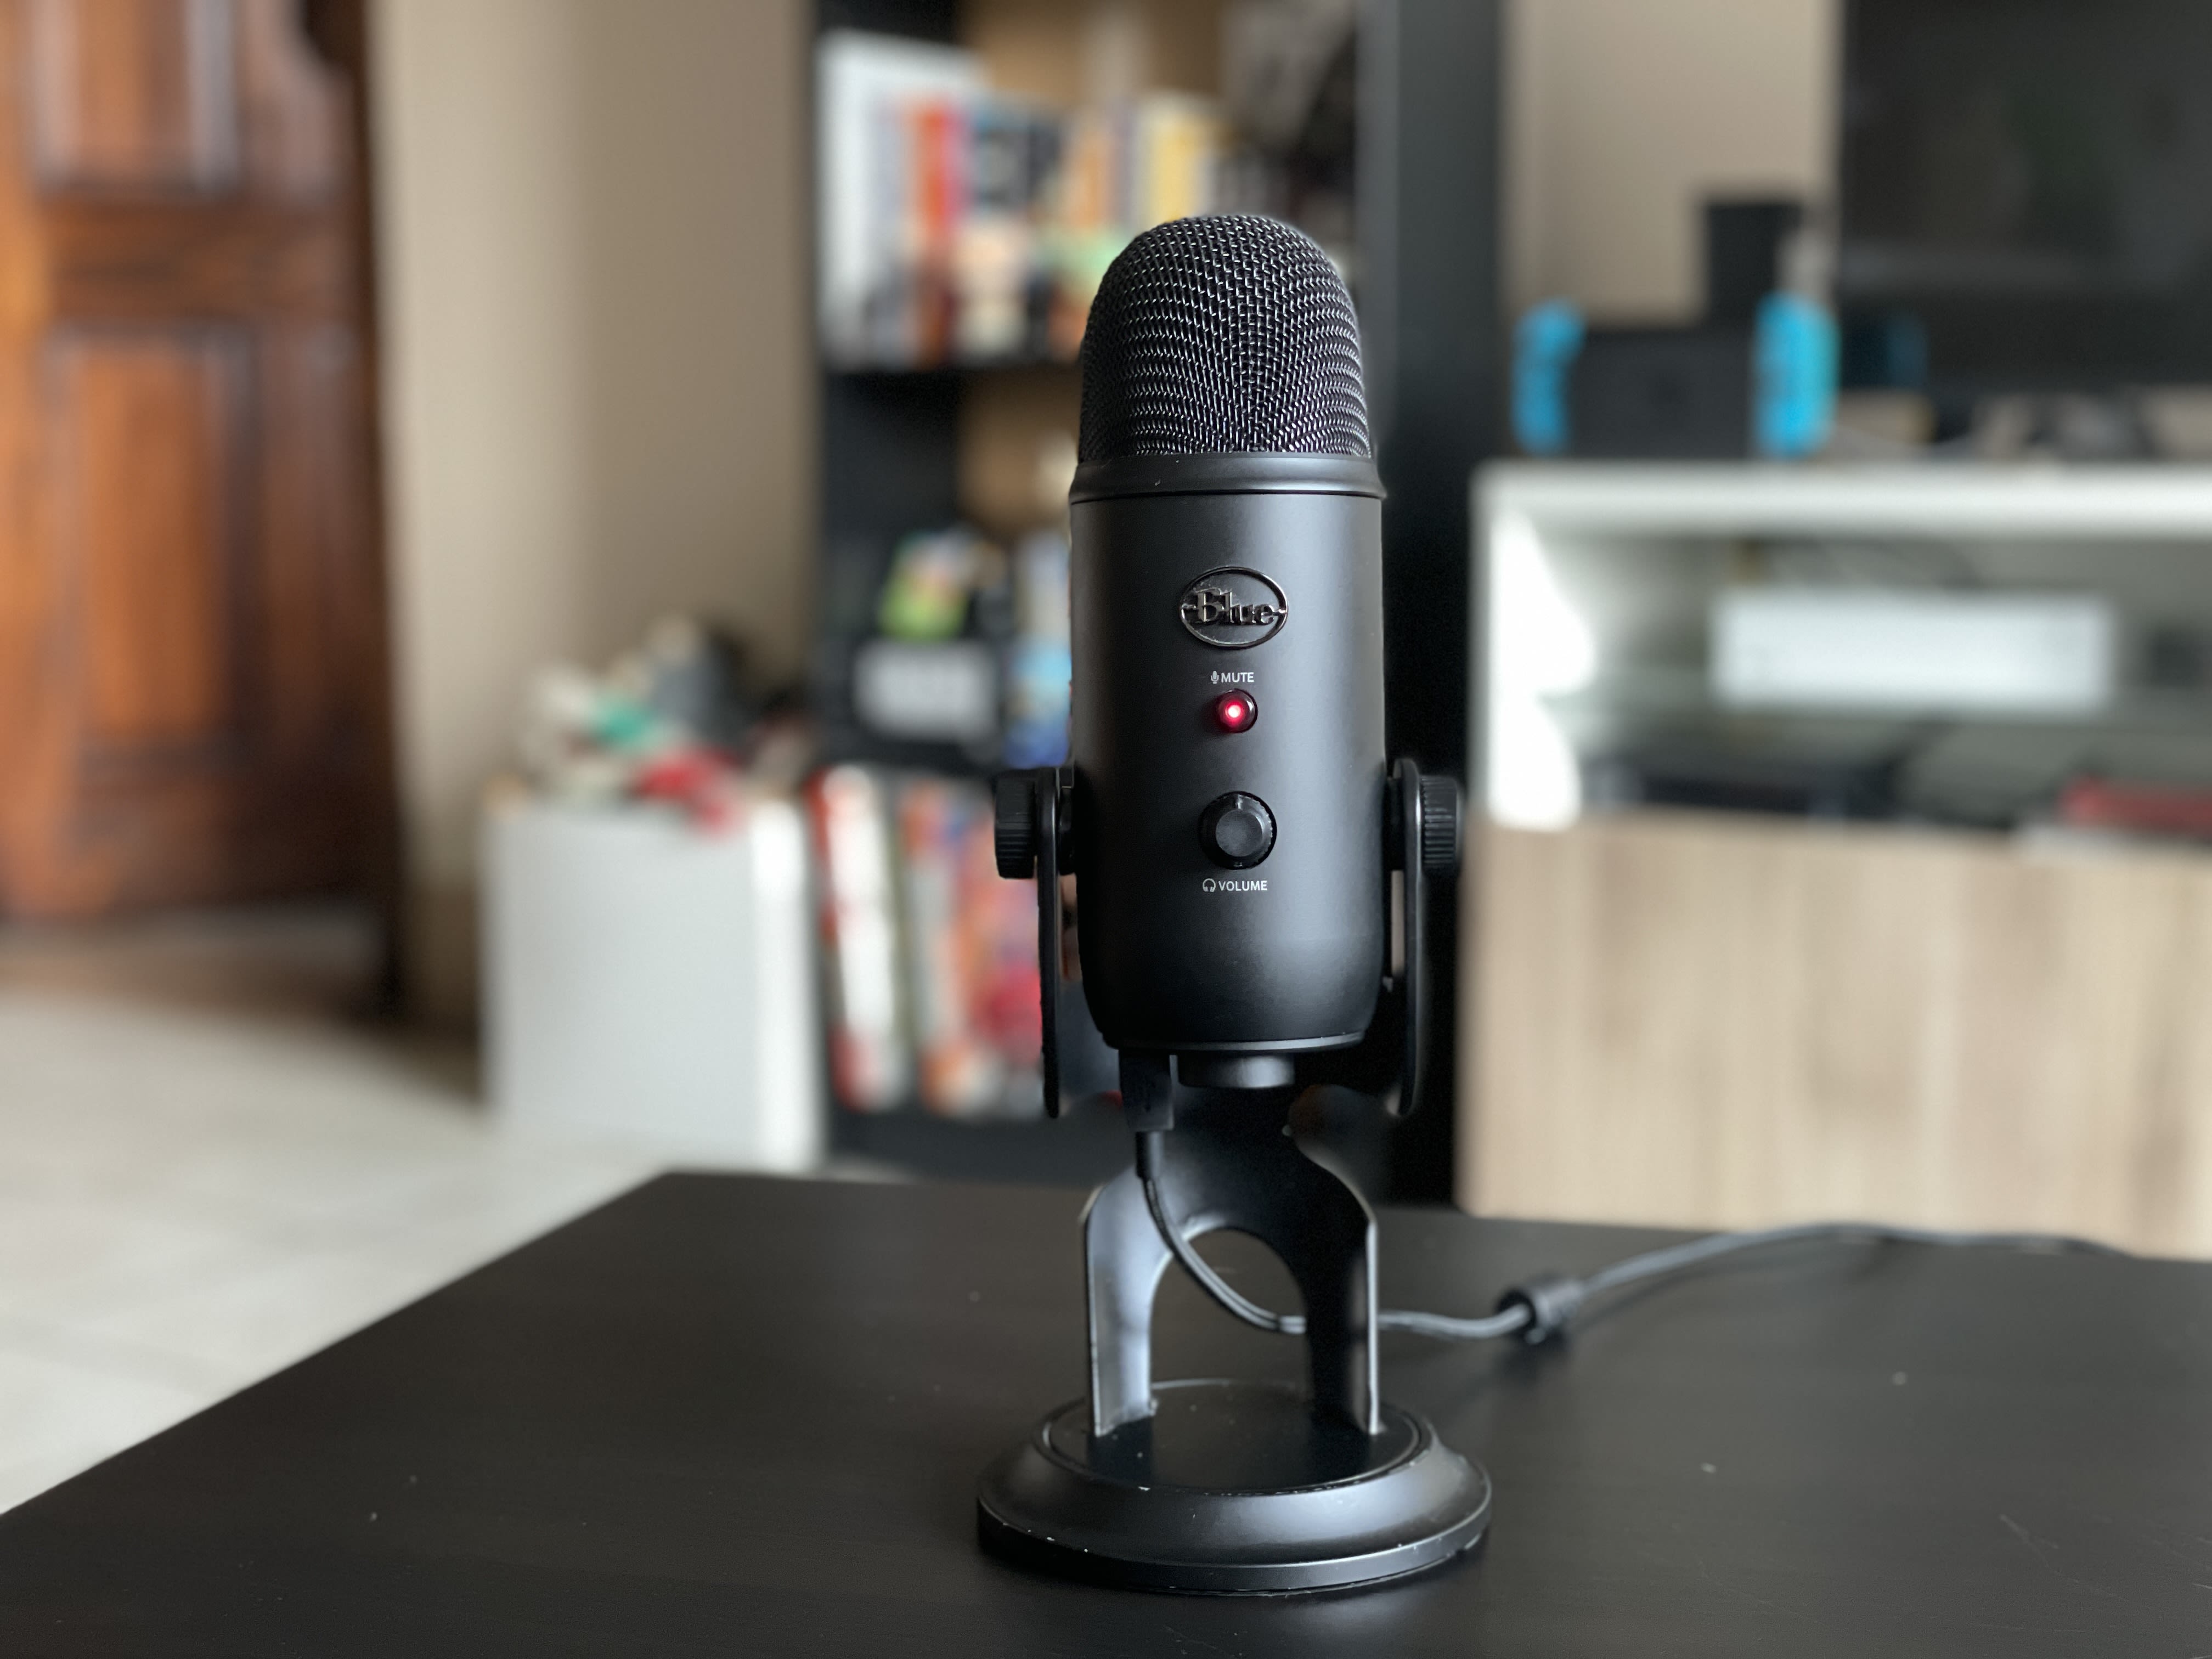 Hands on with the Yeti microphone (photos) - CNET